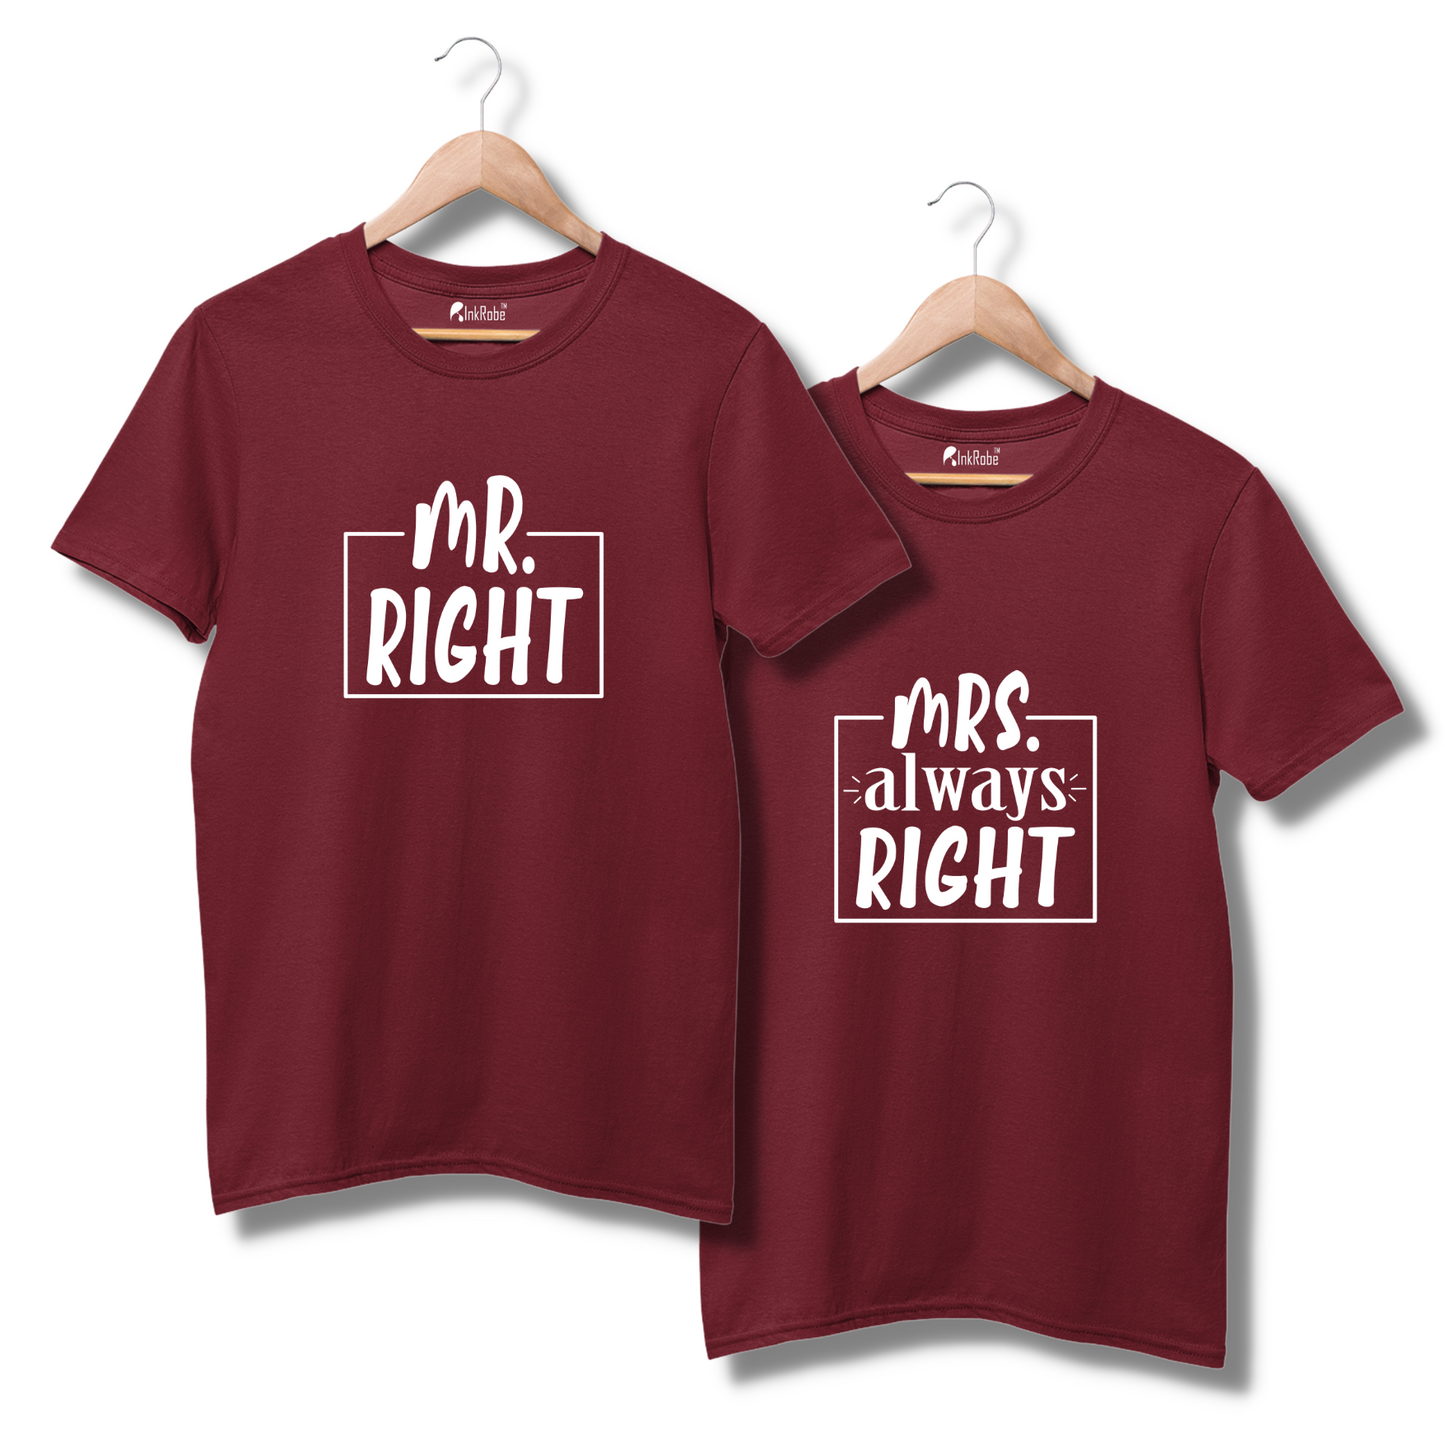 Mr Right - Mrs Always Right Couple Tshirt